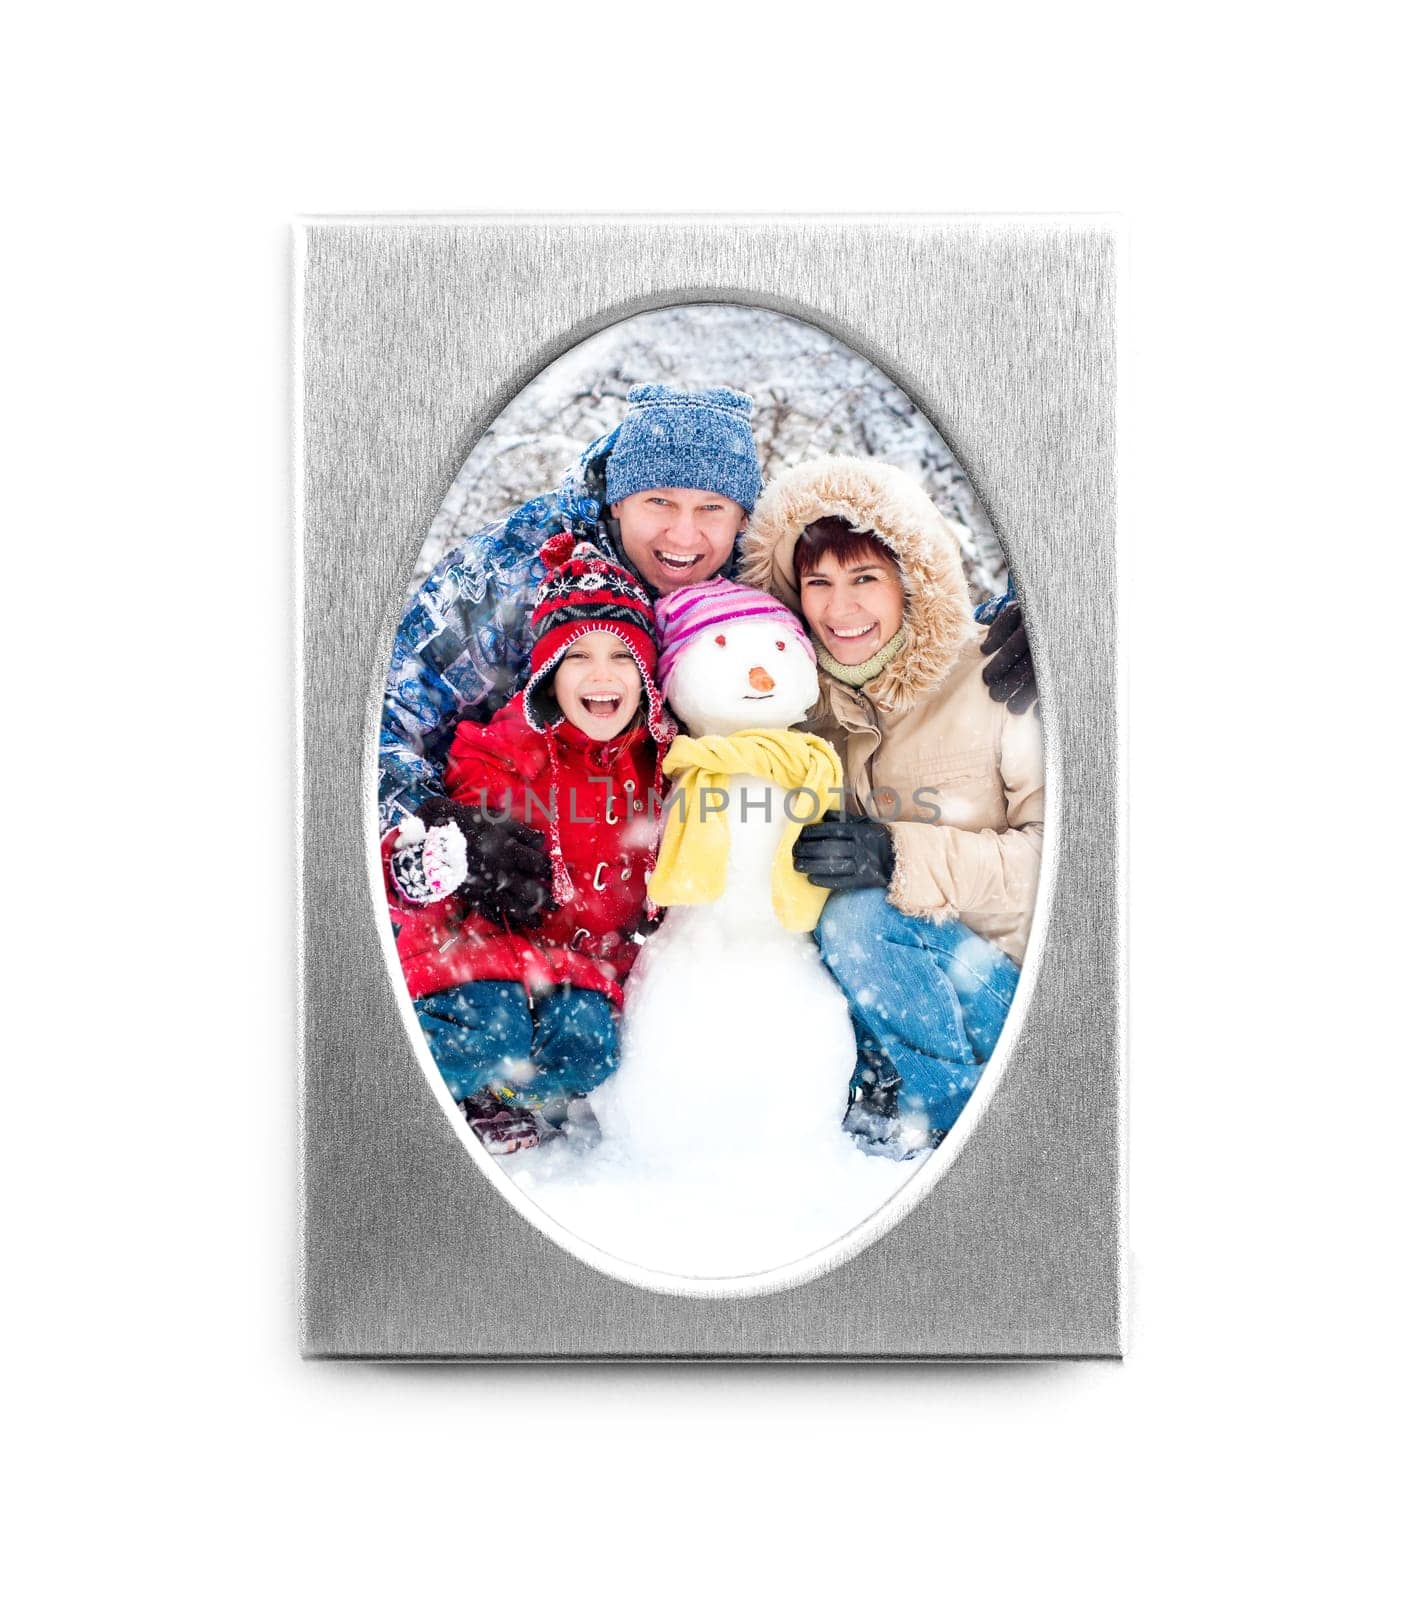 Silver frame with happy family photo by GekaSkr